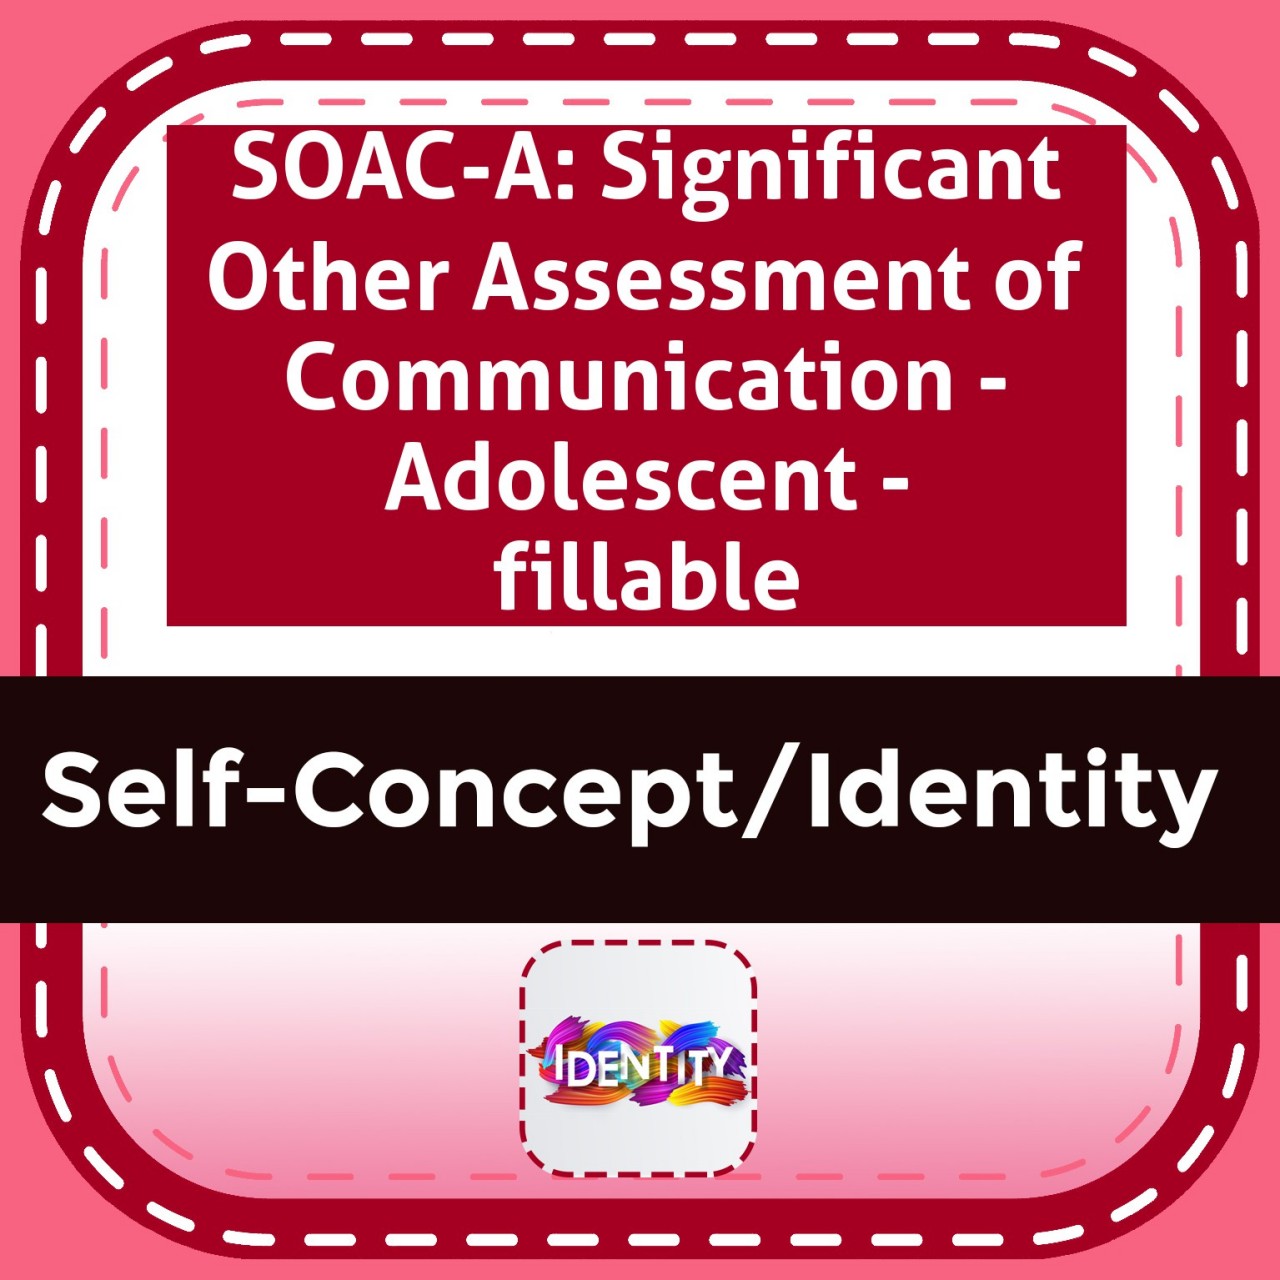 SOAC-A: Significant Other Assessment of Communication - Adolescent - fillable